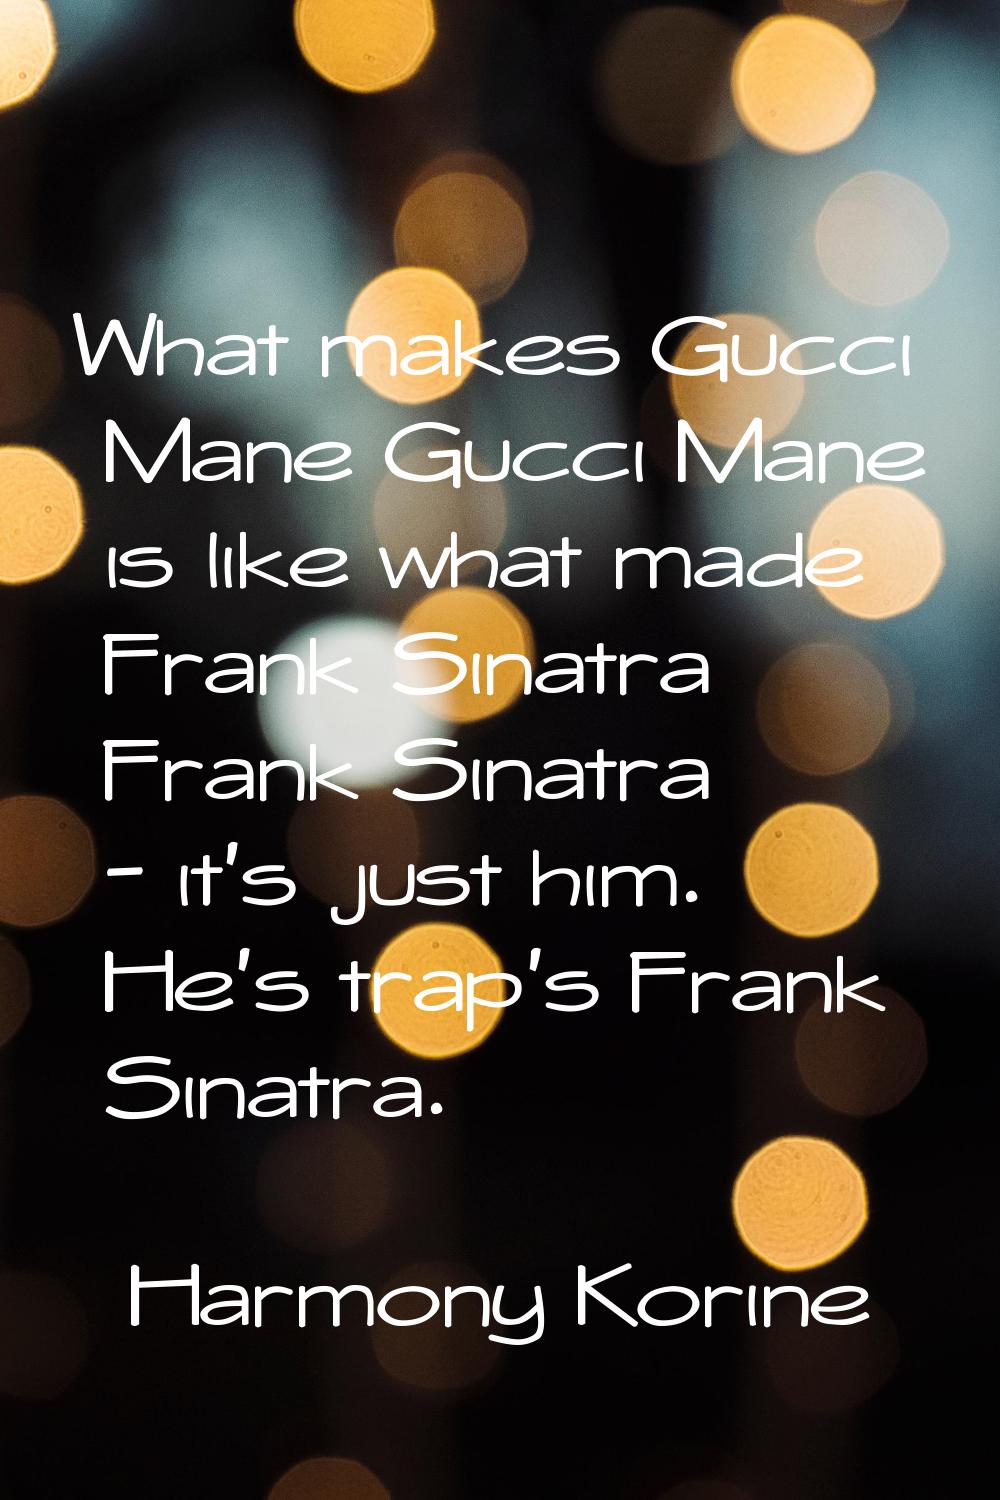 What makes Gucci Mane Gucci Mane is like what made Frank Sinatra Frank Sinatra - it's just him. He'